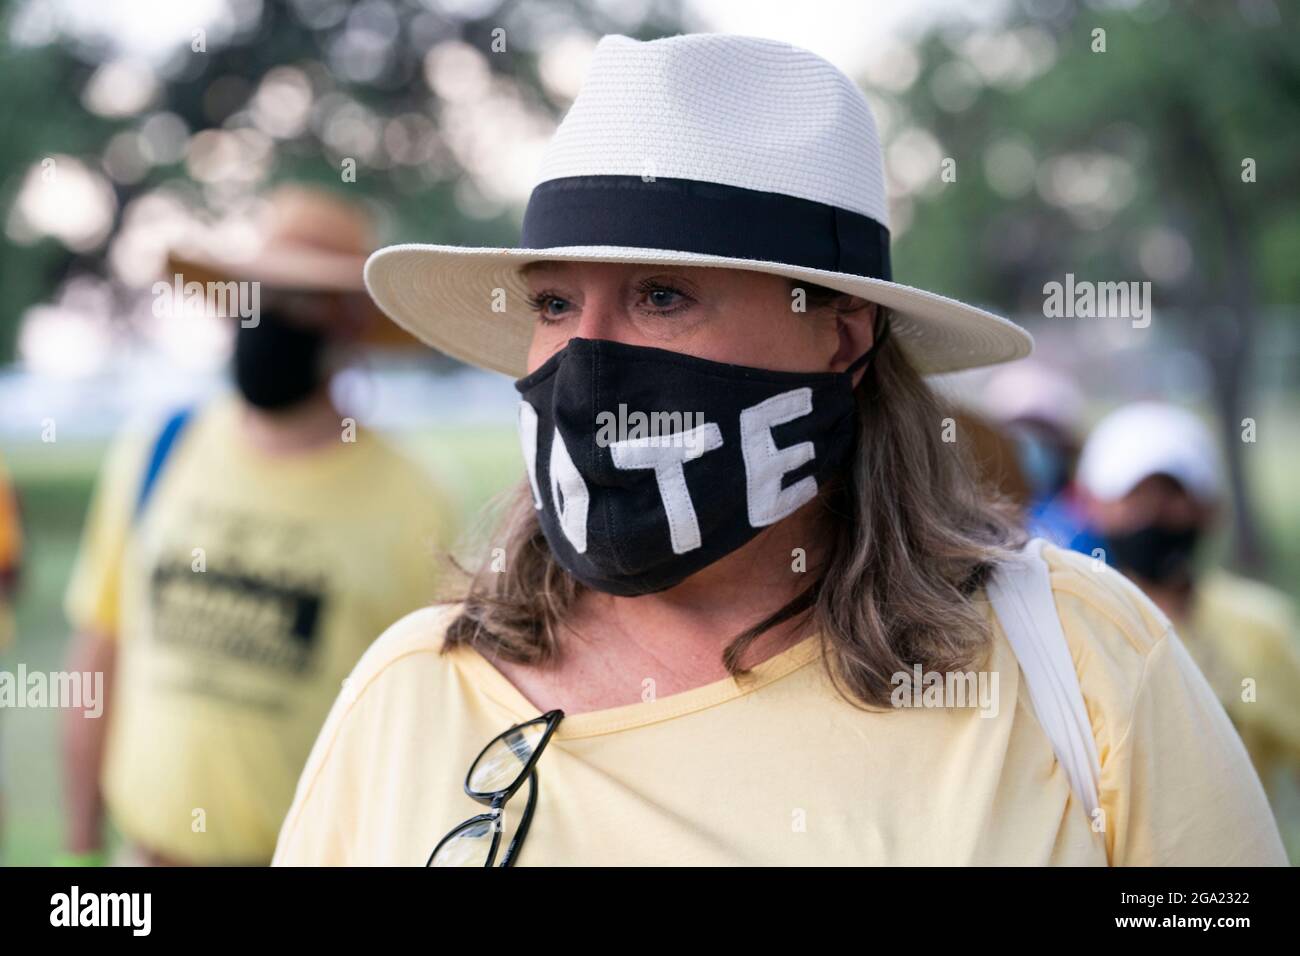 Georgetown, United States. 28th July, 2021. National and Texas voting rights activists, including this woman in a 'Vote' mask, begin a 30-mile, four-day march from Georgetown, Texas to the State Capitol in Austin. Due to summer Texas heat, several 100-person shifts will trade off marching about 4 miles each. The March for Democracy urges passage of the John Lewis Voting Rights Act and elimination of statewide barriers to voting. Credit: Bob Daemmrich/Alamy Live News Stock Photo